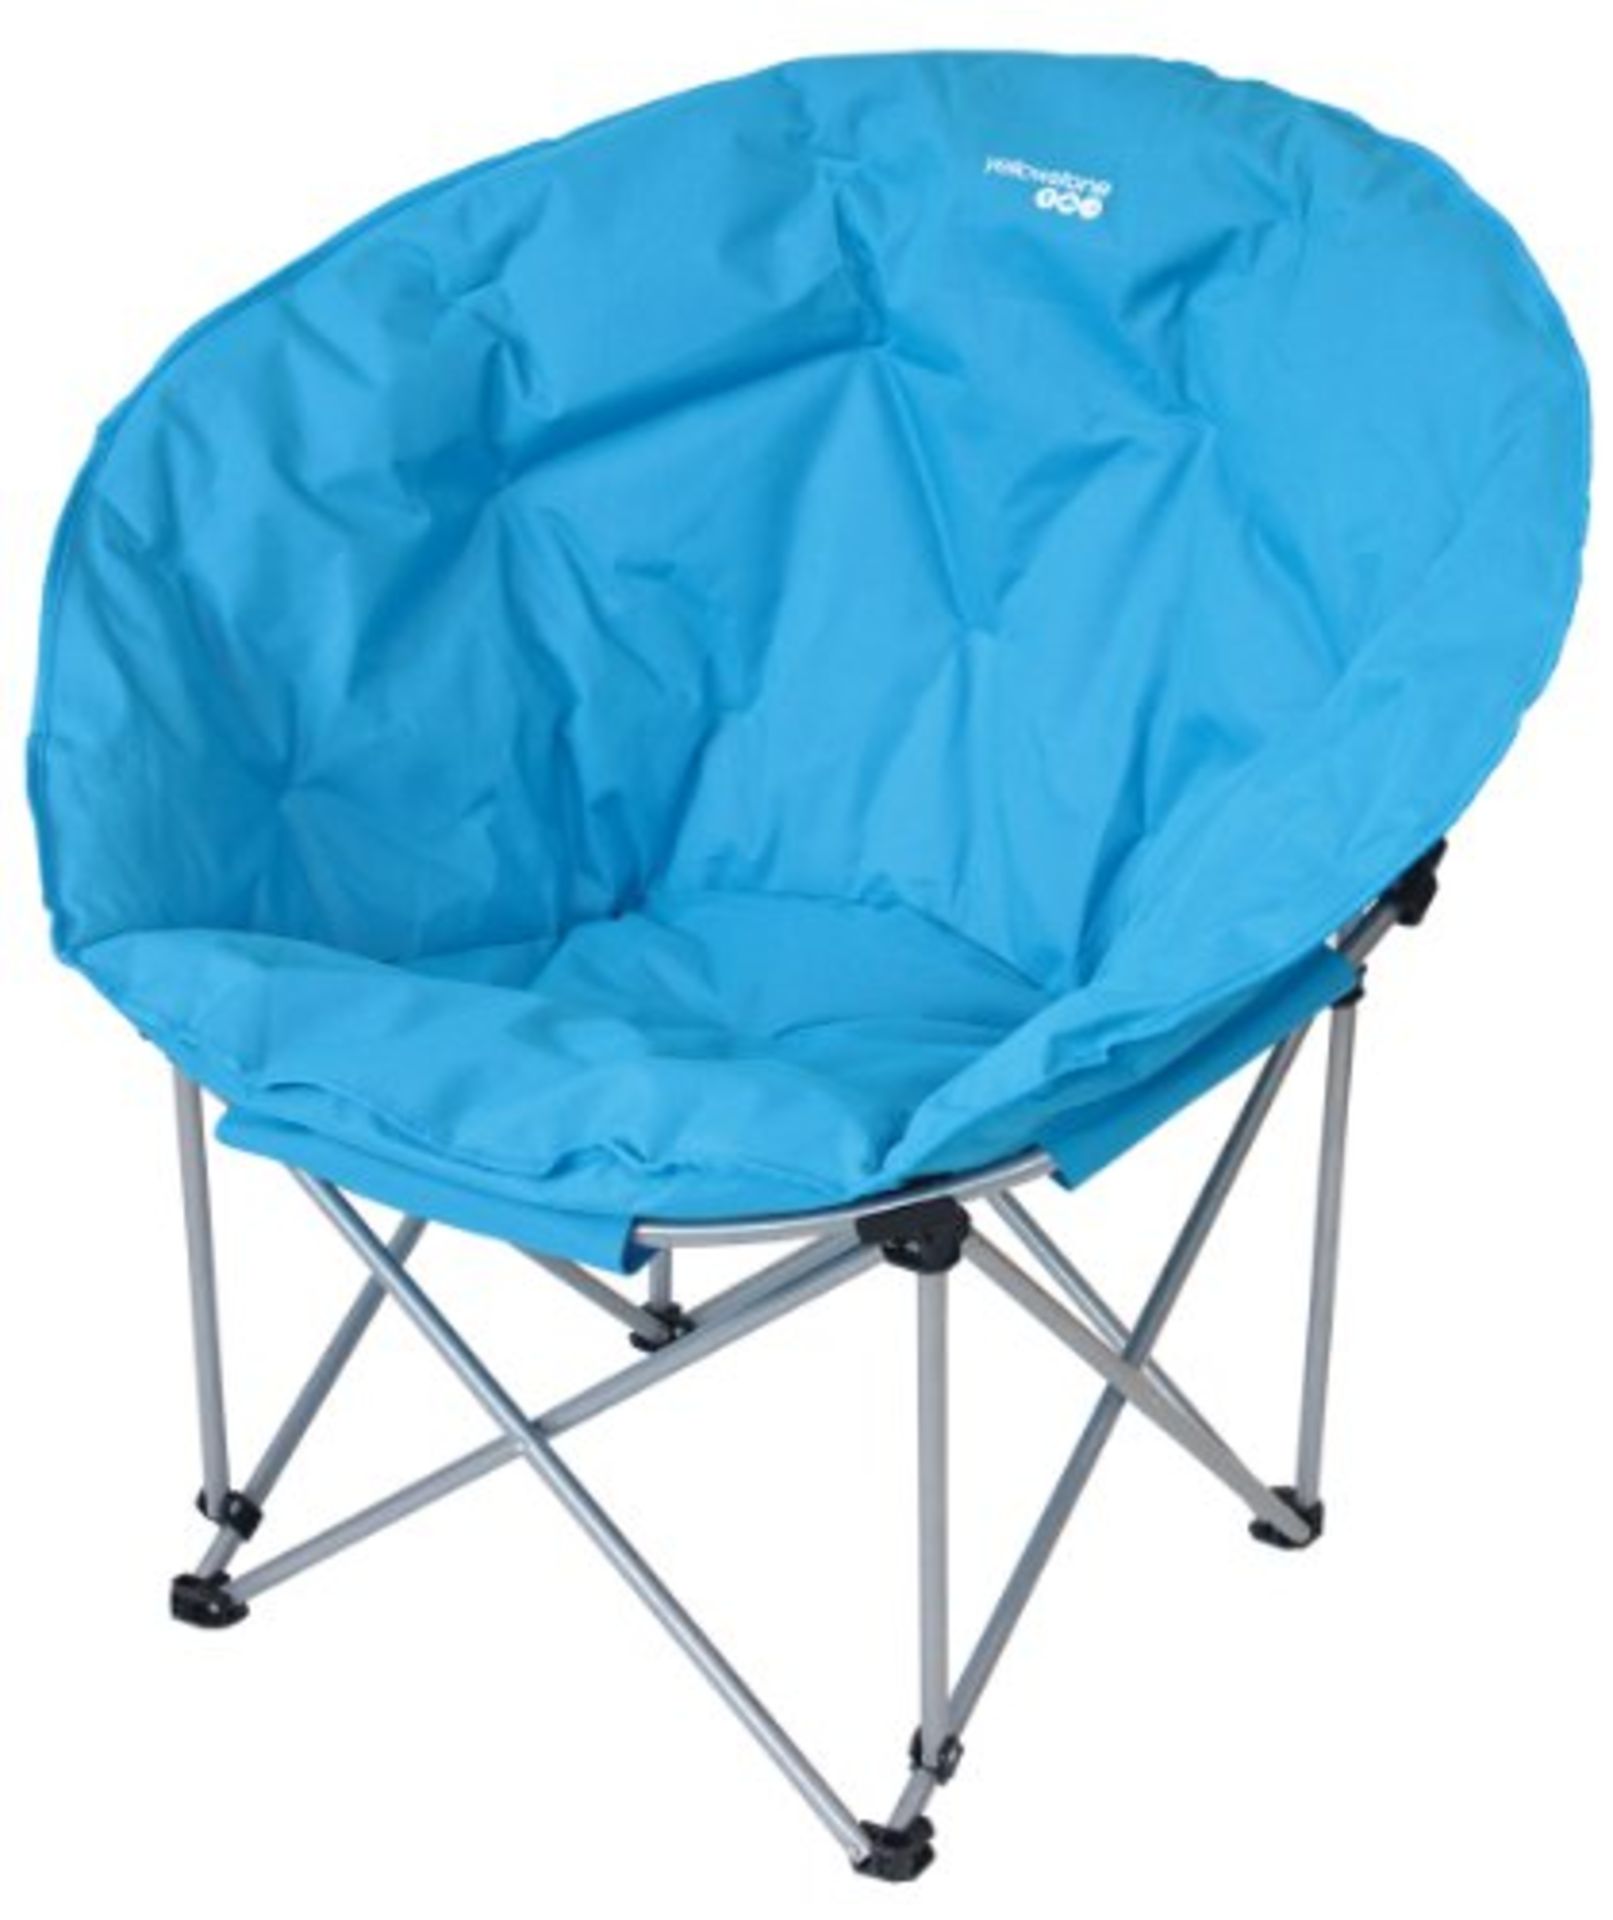 V Brand New Orbit Outdoor Blue Leisure Chair RRP £34.99 X 2 Bid price to be multiplied by Two